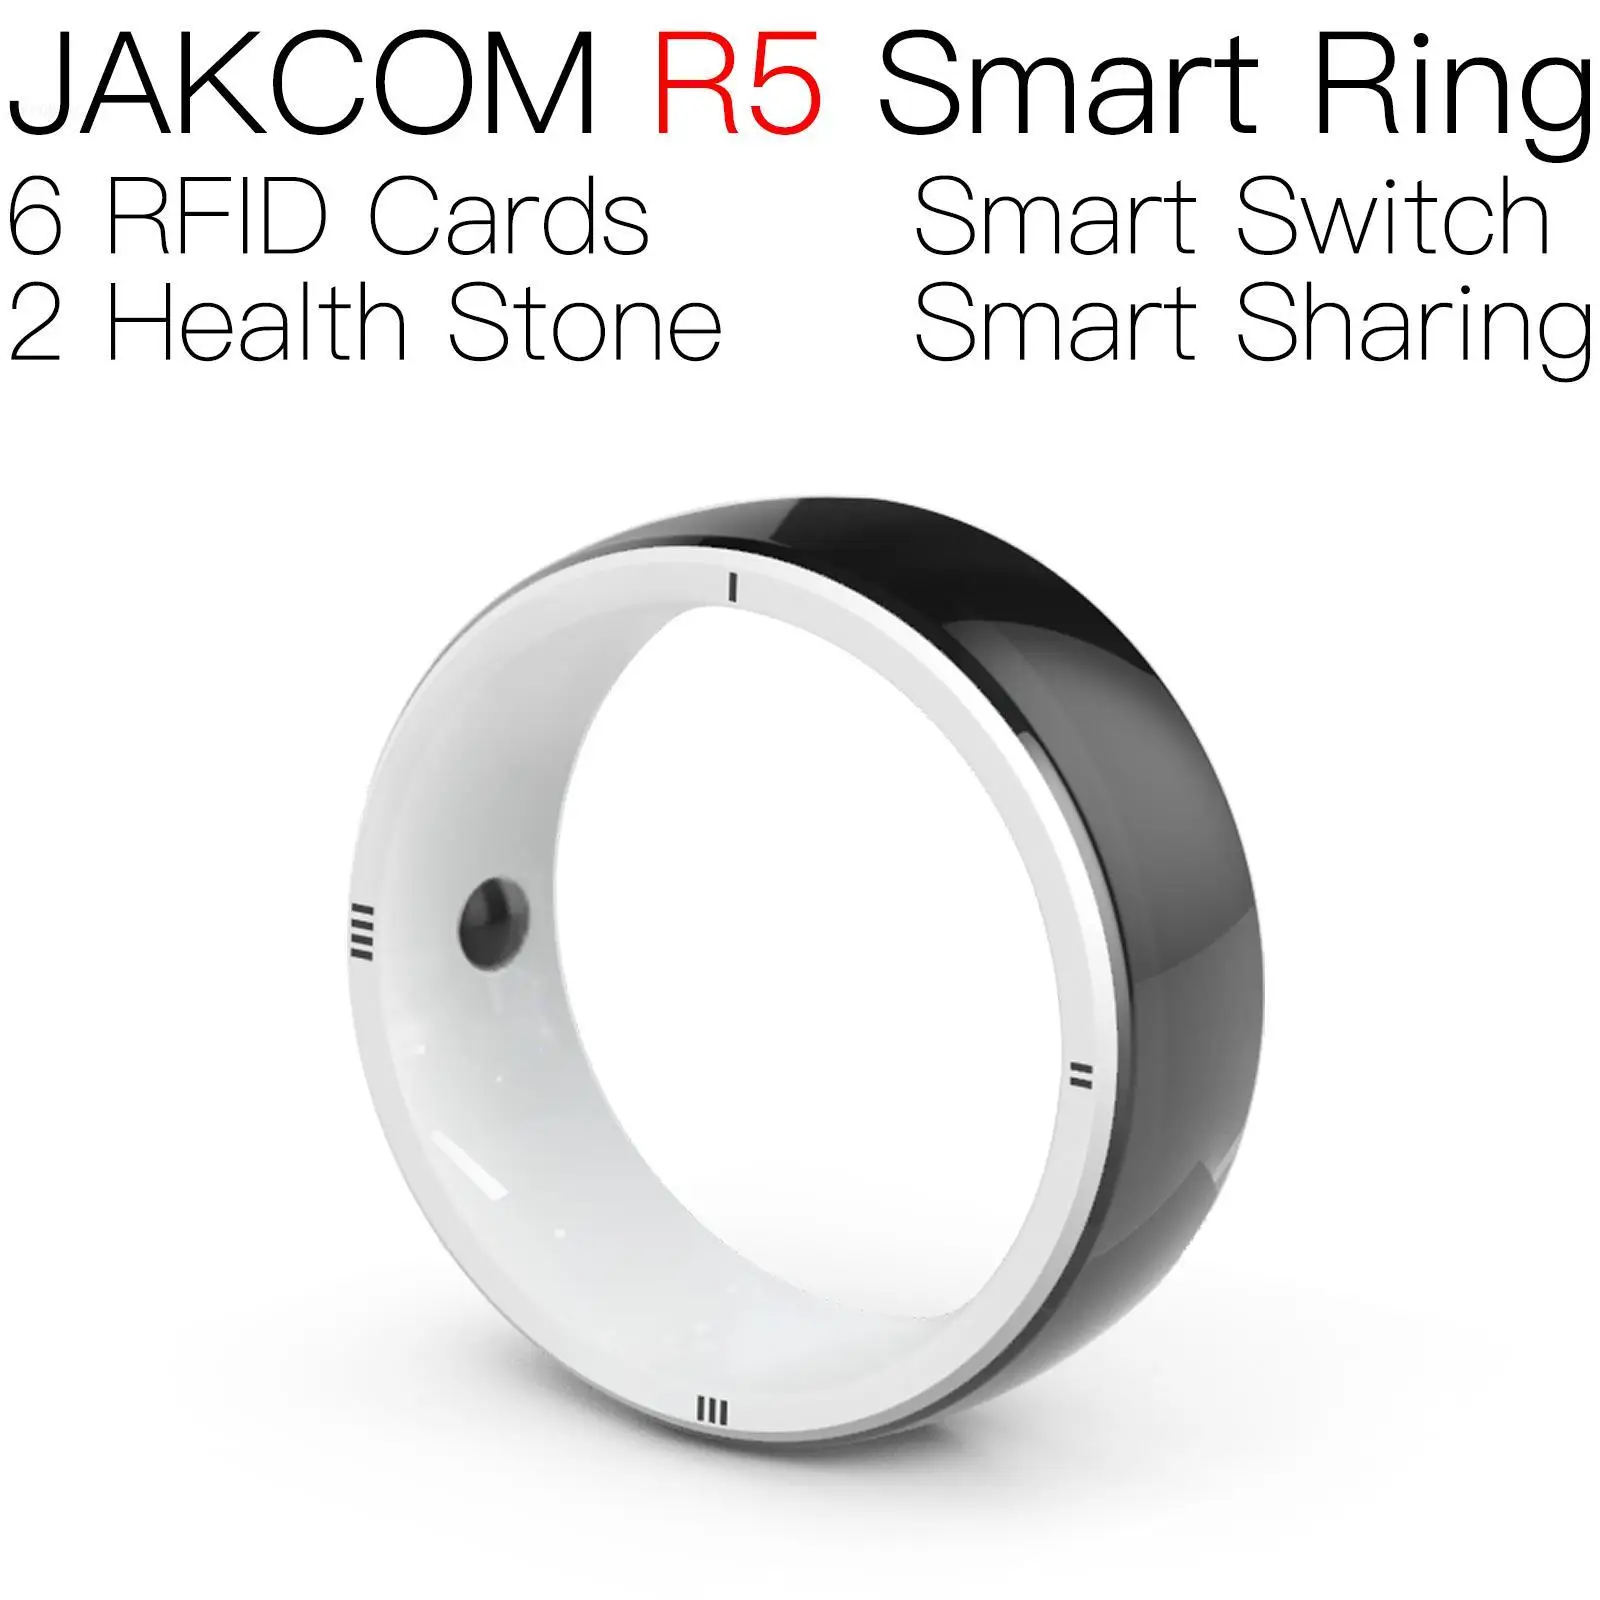 

JAKCOM R5 Smart Ring Super value as laser angle ruler drag 2 band 4 smartwatch smart watch with earbuds purple